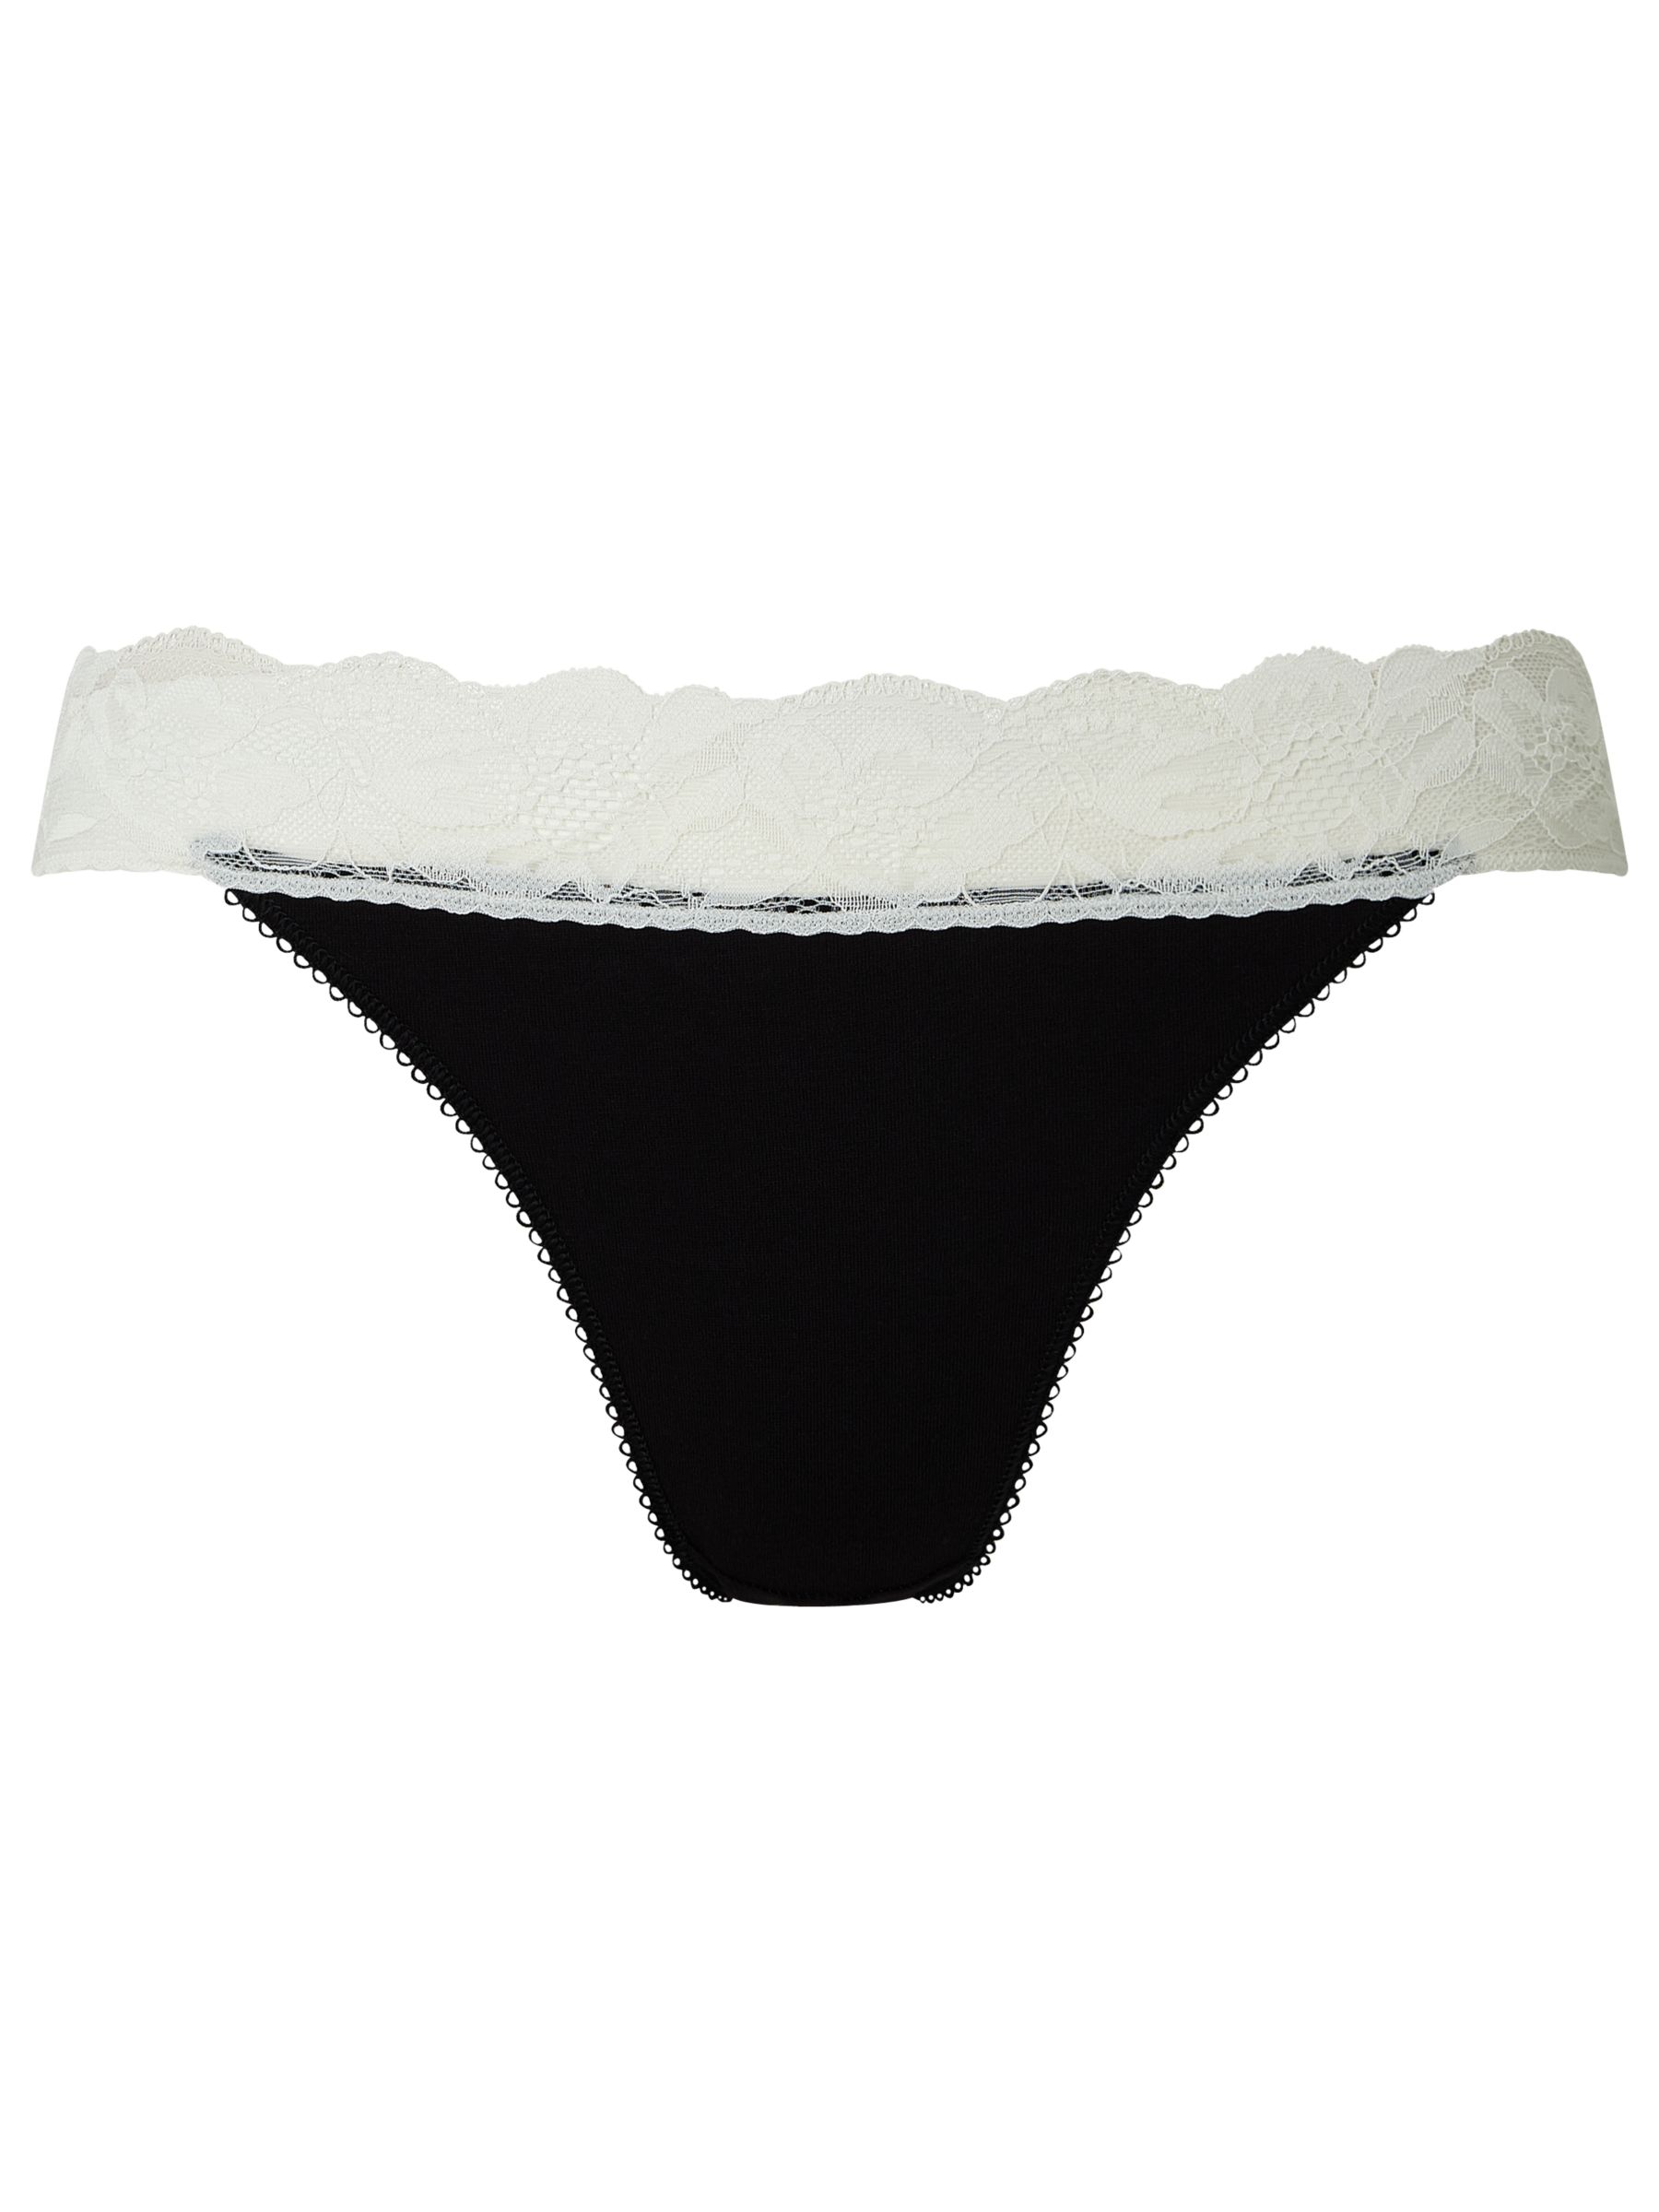 John Lewis ANYDAY Lace Trim Tanga Knickers, Pack of 3, Black/Cream, 14